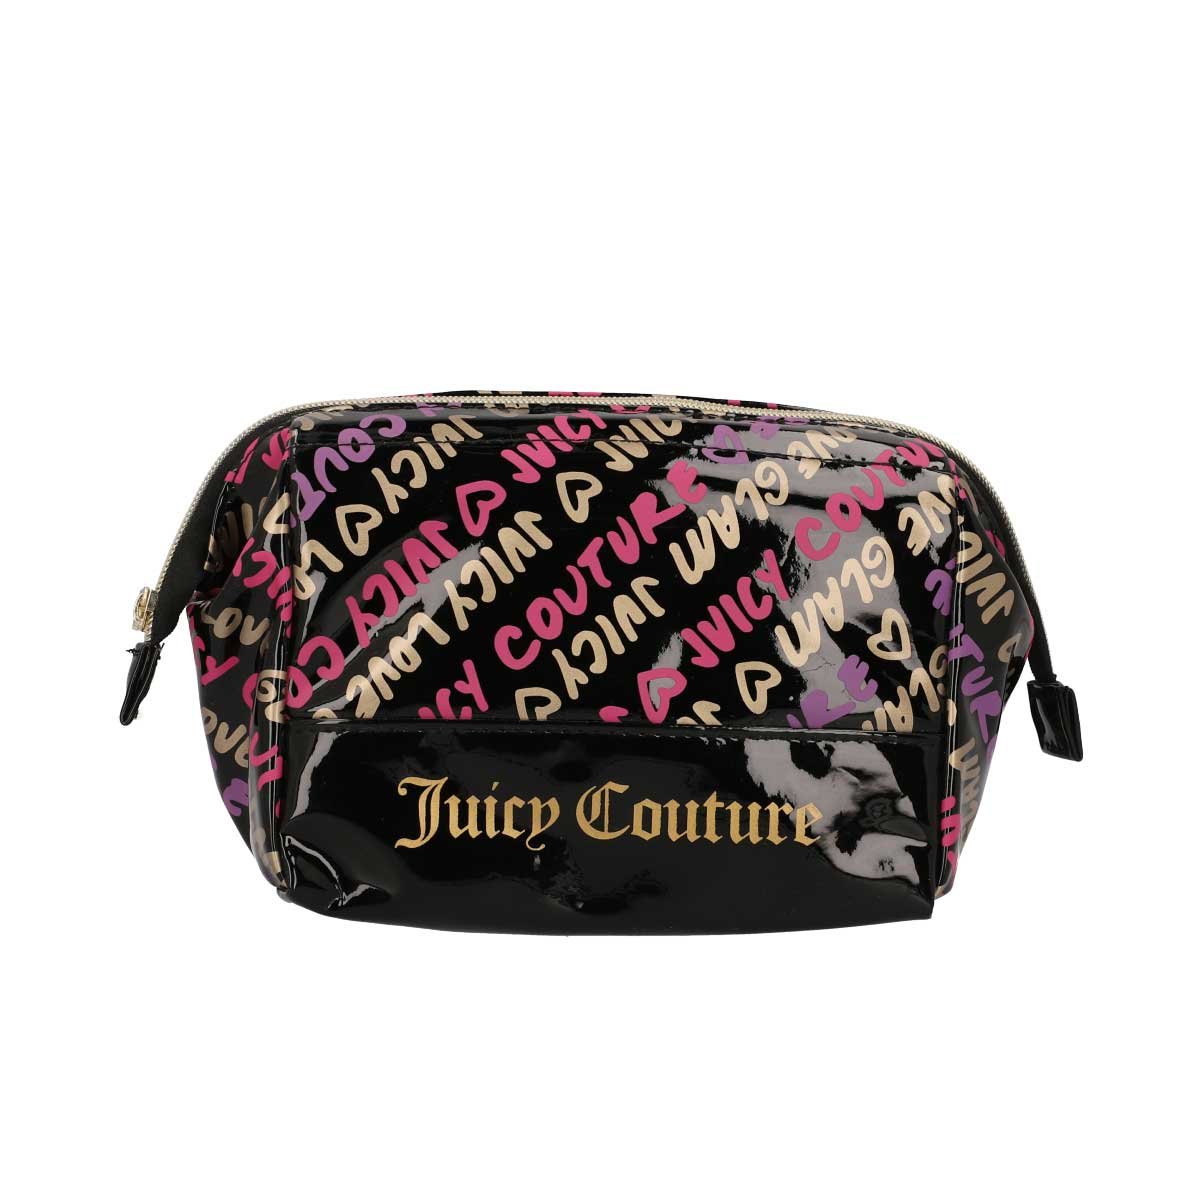 Cosmetiquera Juicy Couture